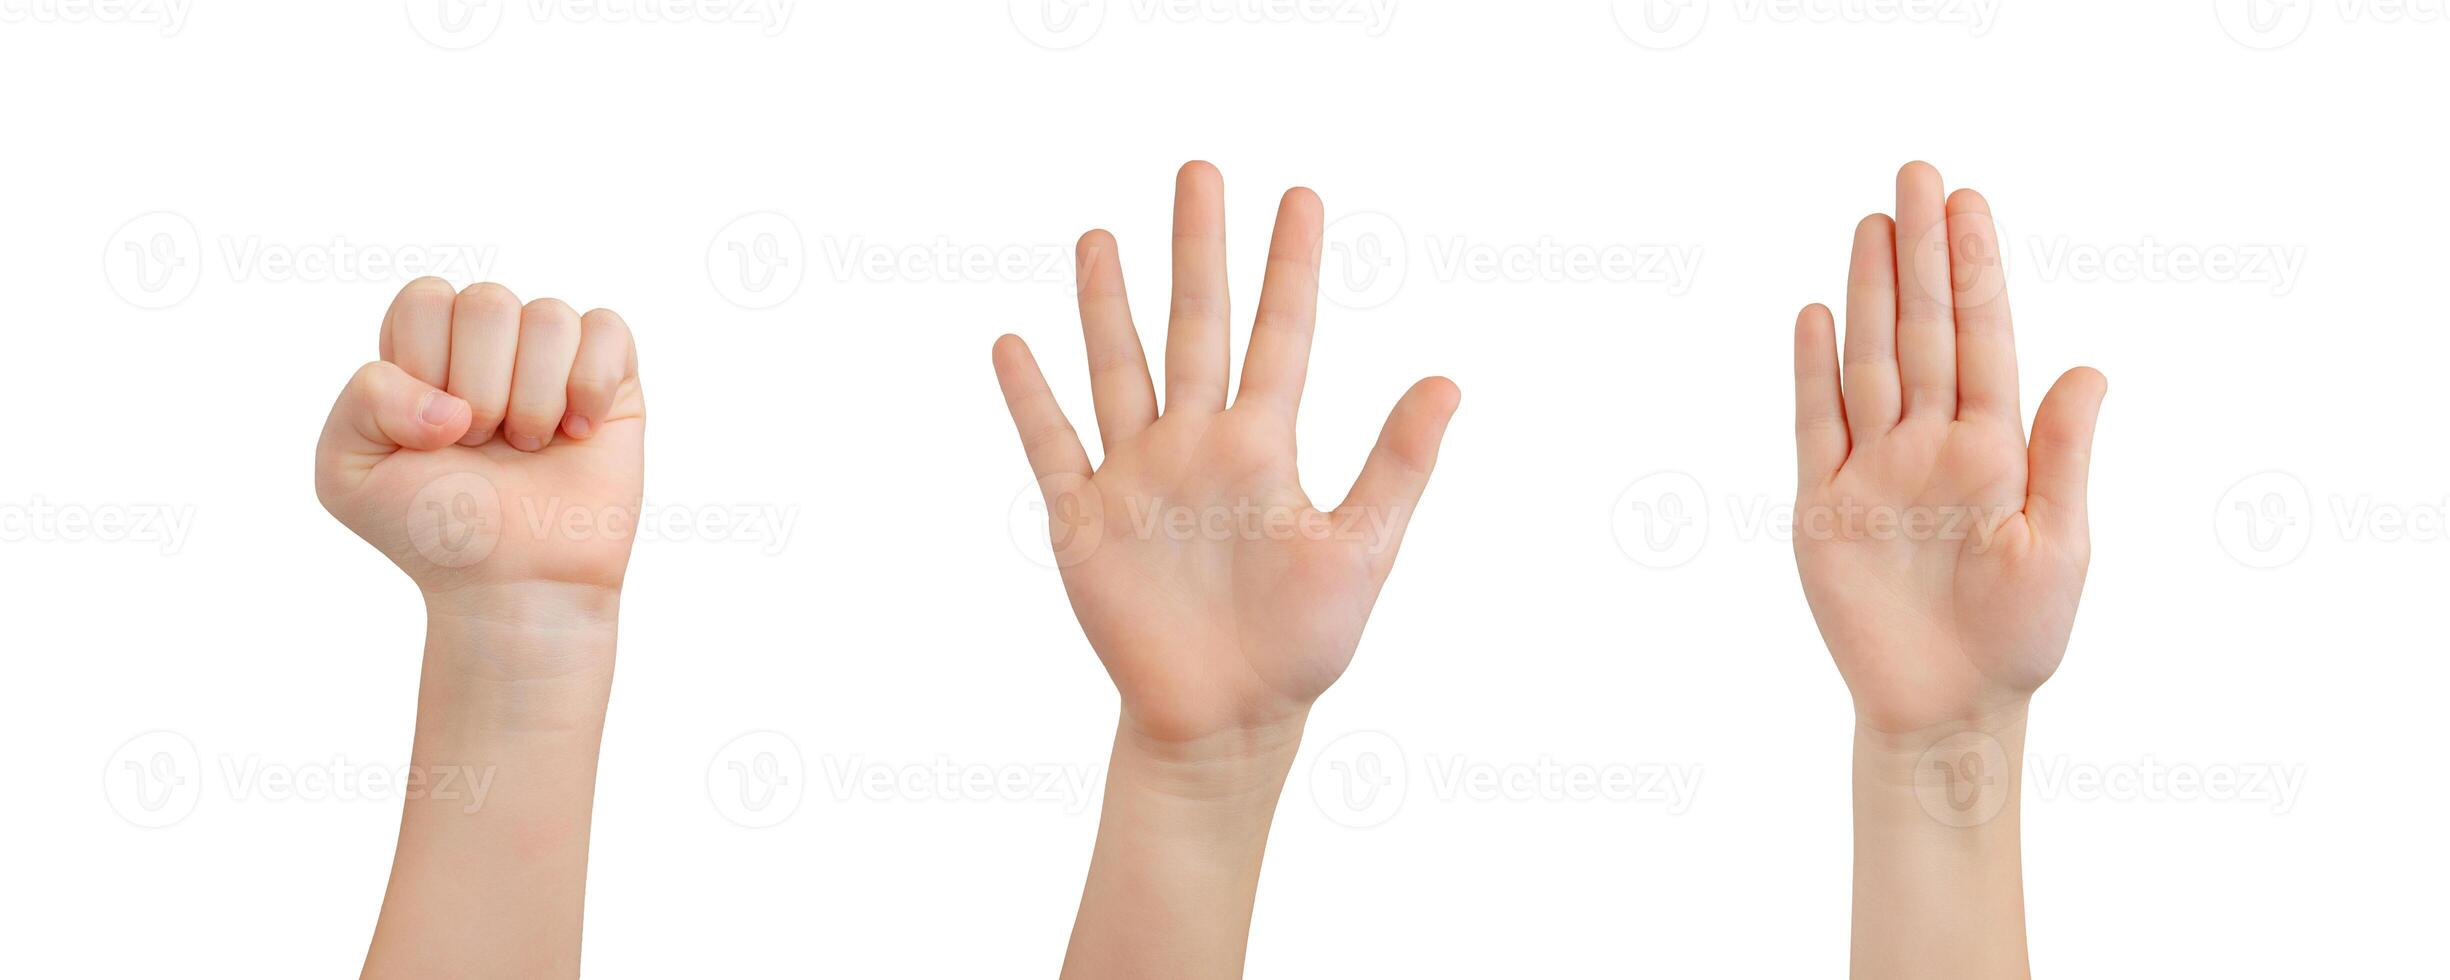 Child's isolated hand. Expressing closed, spread, and stop gestures, encouraging communication and understanding through hand signals photo